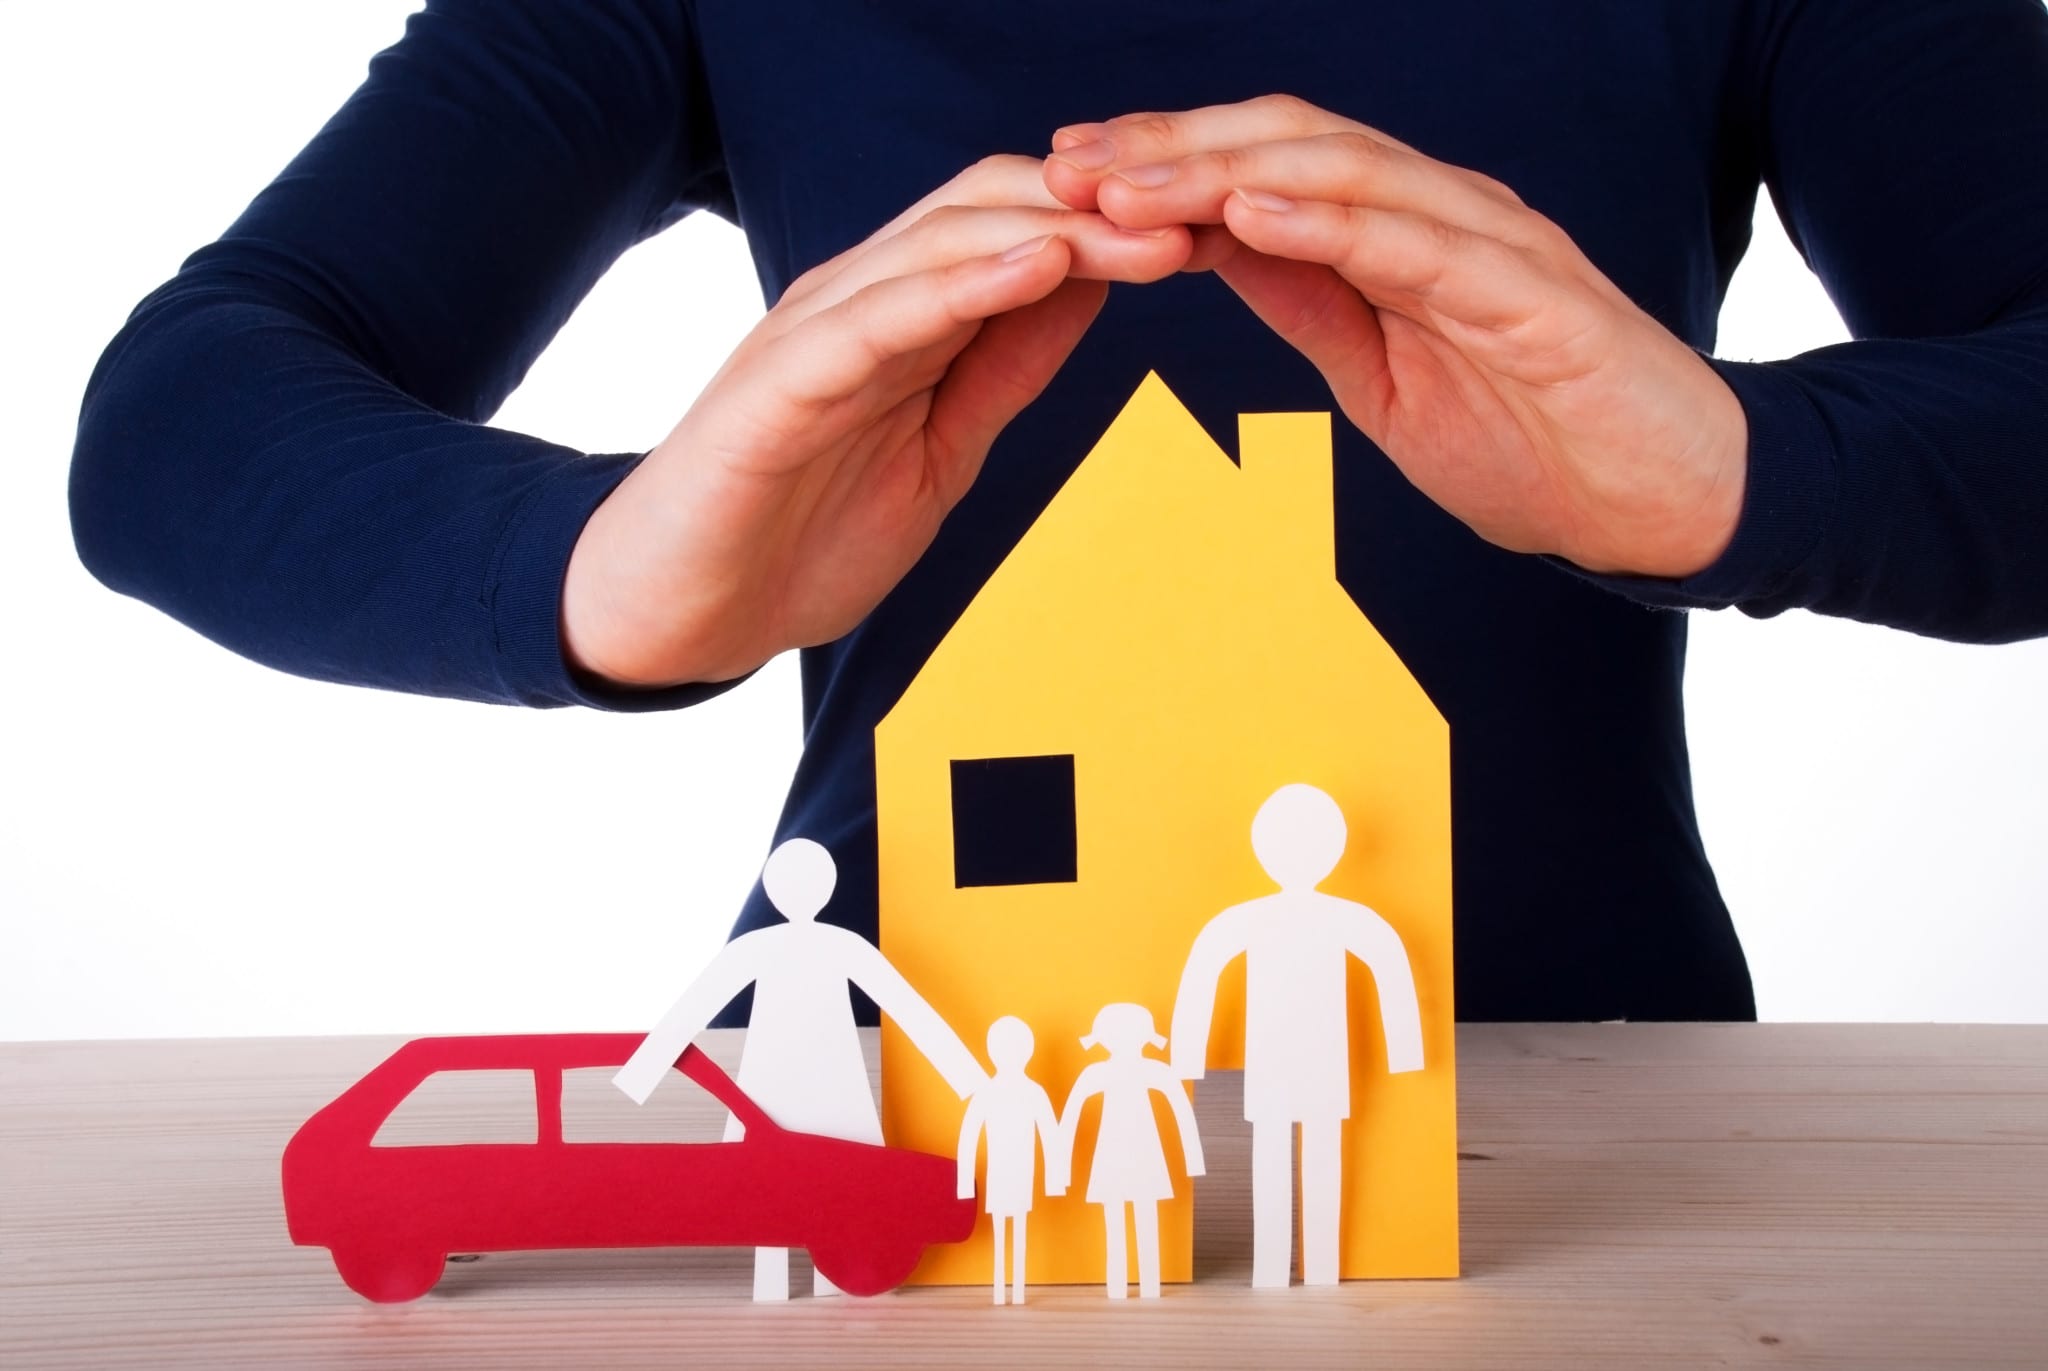 Hands Protecting House, Family and Car